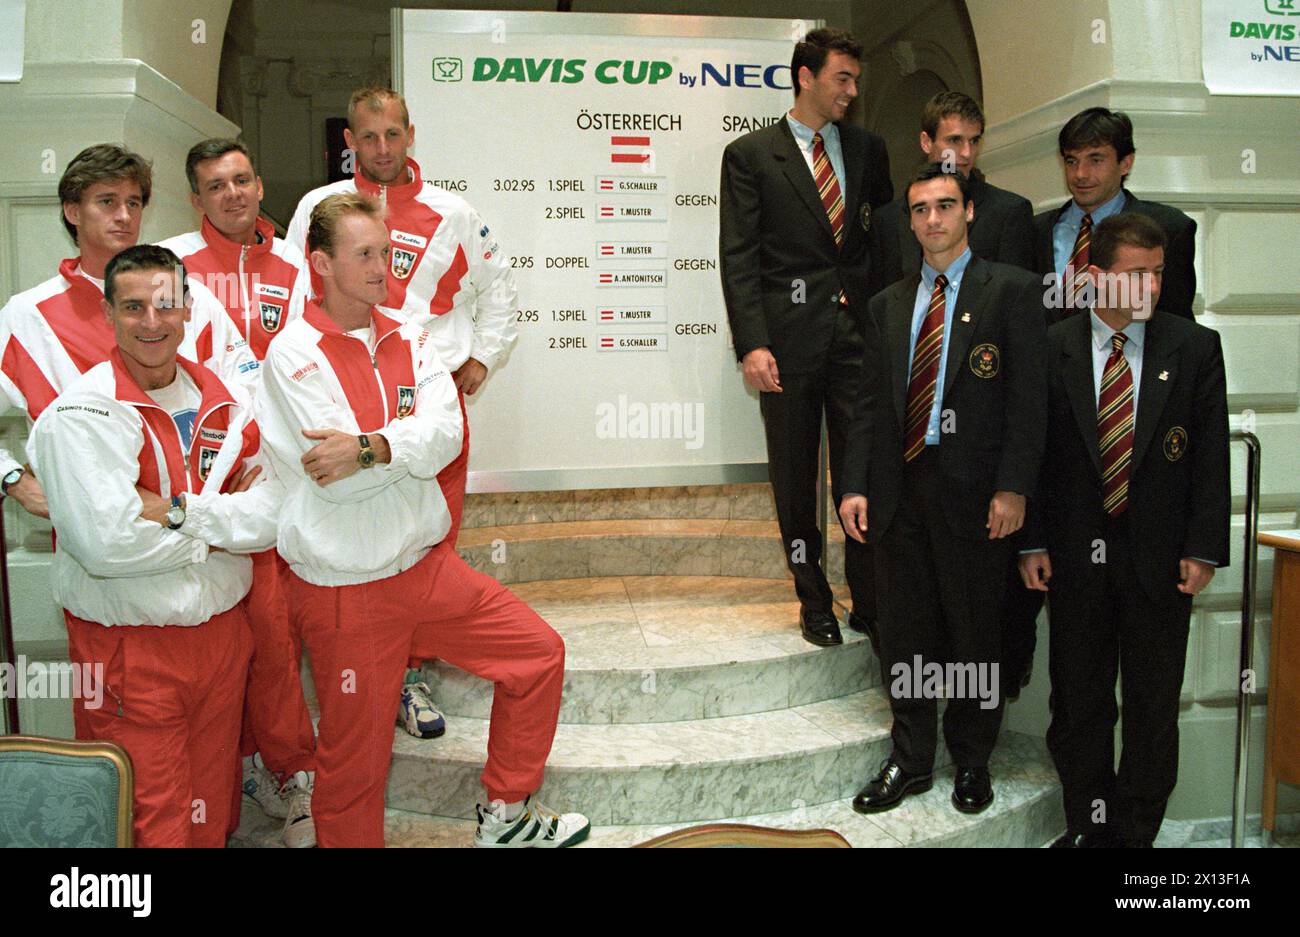 Assignment for the upcoming Davis Cup in Vienna on February 2nd 1995. In the picture: The Austrian team (left), comprising (back, l-r) Gerald Mandl, captain Ronald Leitgeb, Thomas Muster, (front, l-r) Alexander Antonitsch and Gilbert Schaller and the Spanish team on the right side: (back row, l-r) Sergi Bruguera, Carlos Costa, Emilio Sanchez, (front row, l-r) Alberto Berasategui and captain Juan Avendano. - 19950202 PD0015 - Rechteinfo: Rights Managed (RM) Stock Photo